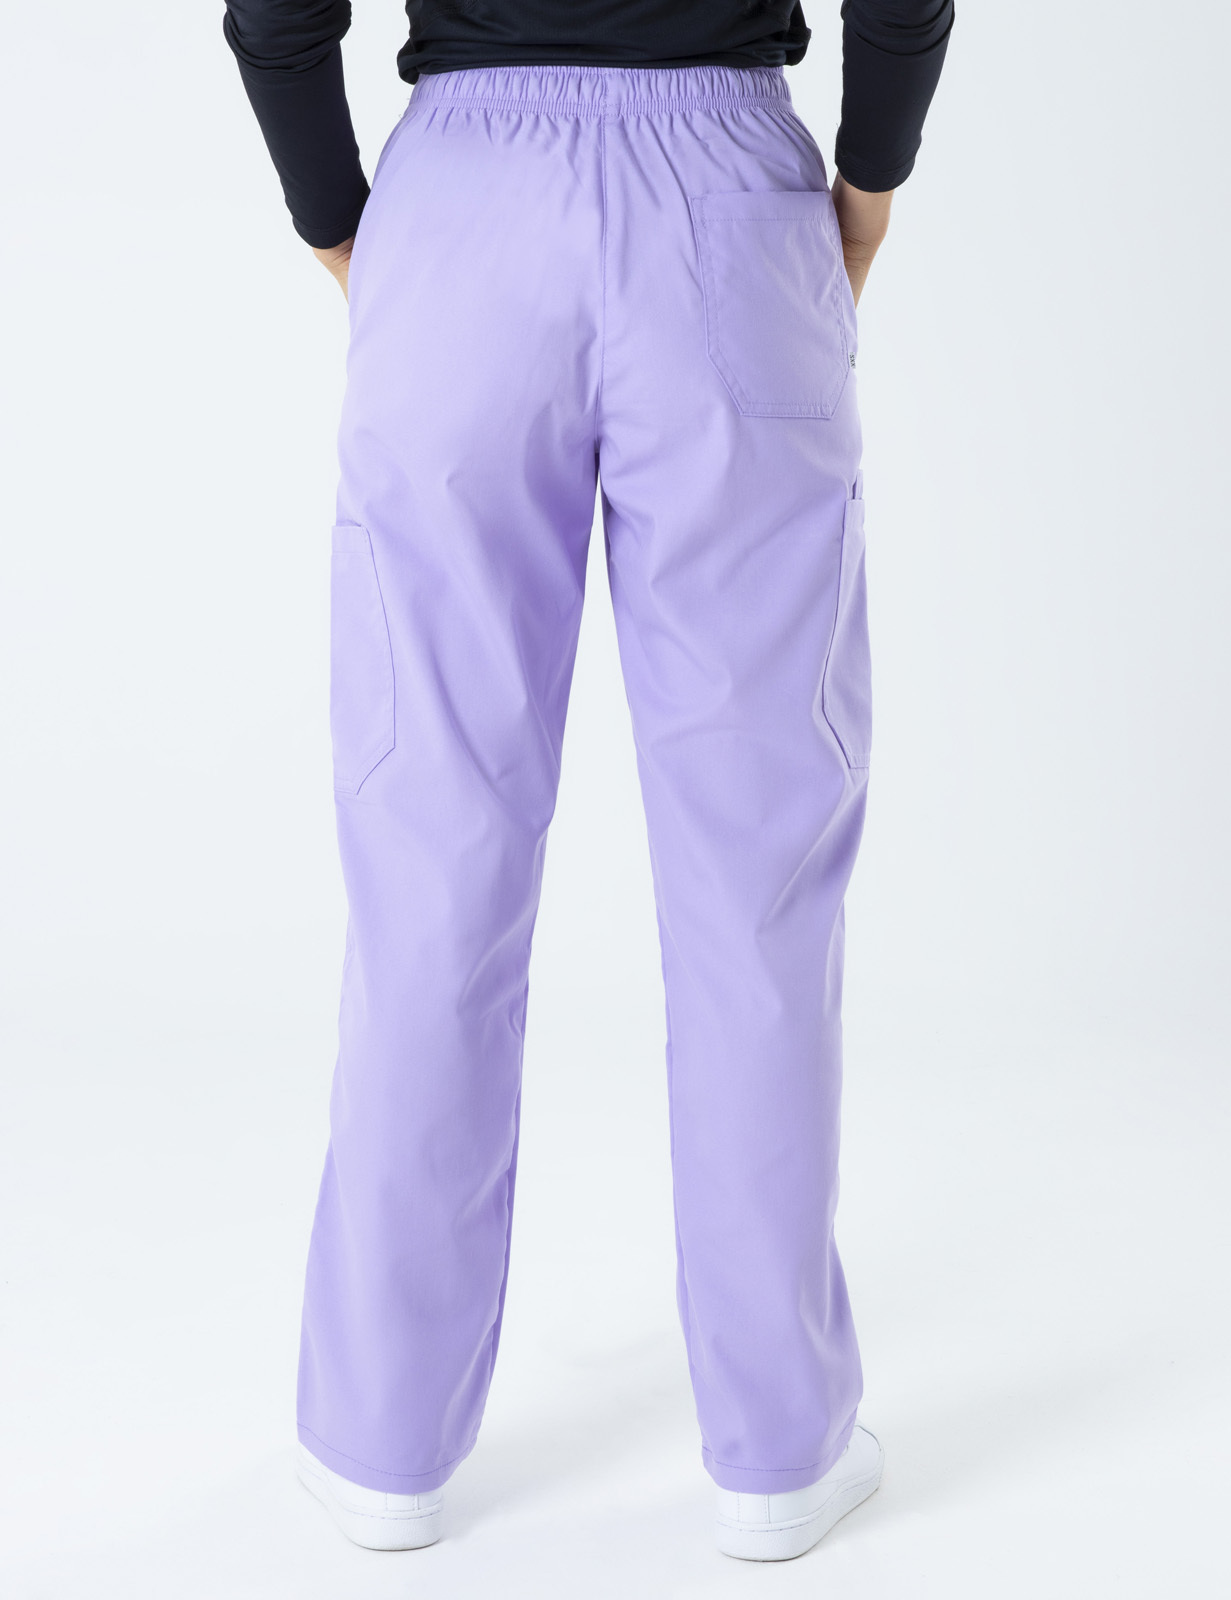 Women's Cargo Performance Pants - Lilac - 4X large - Tall - 1